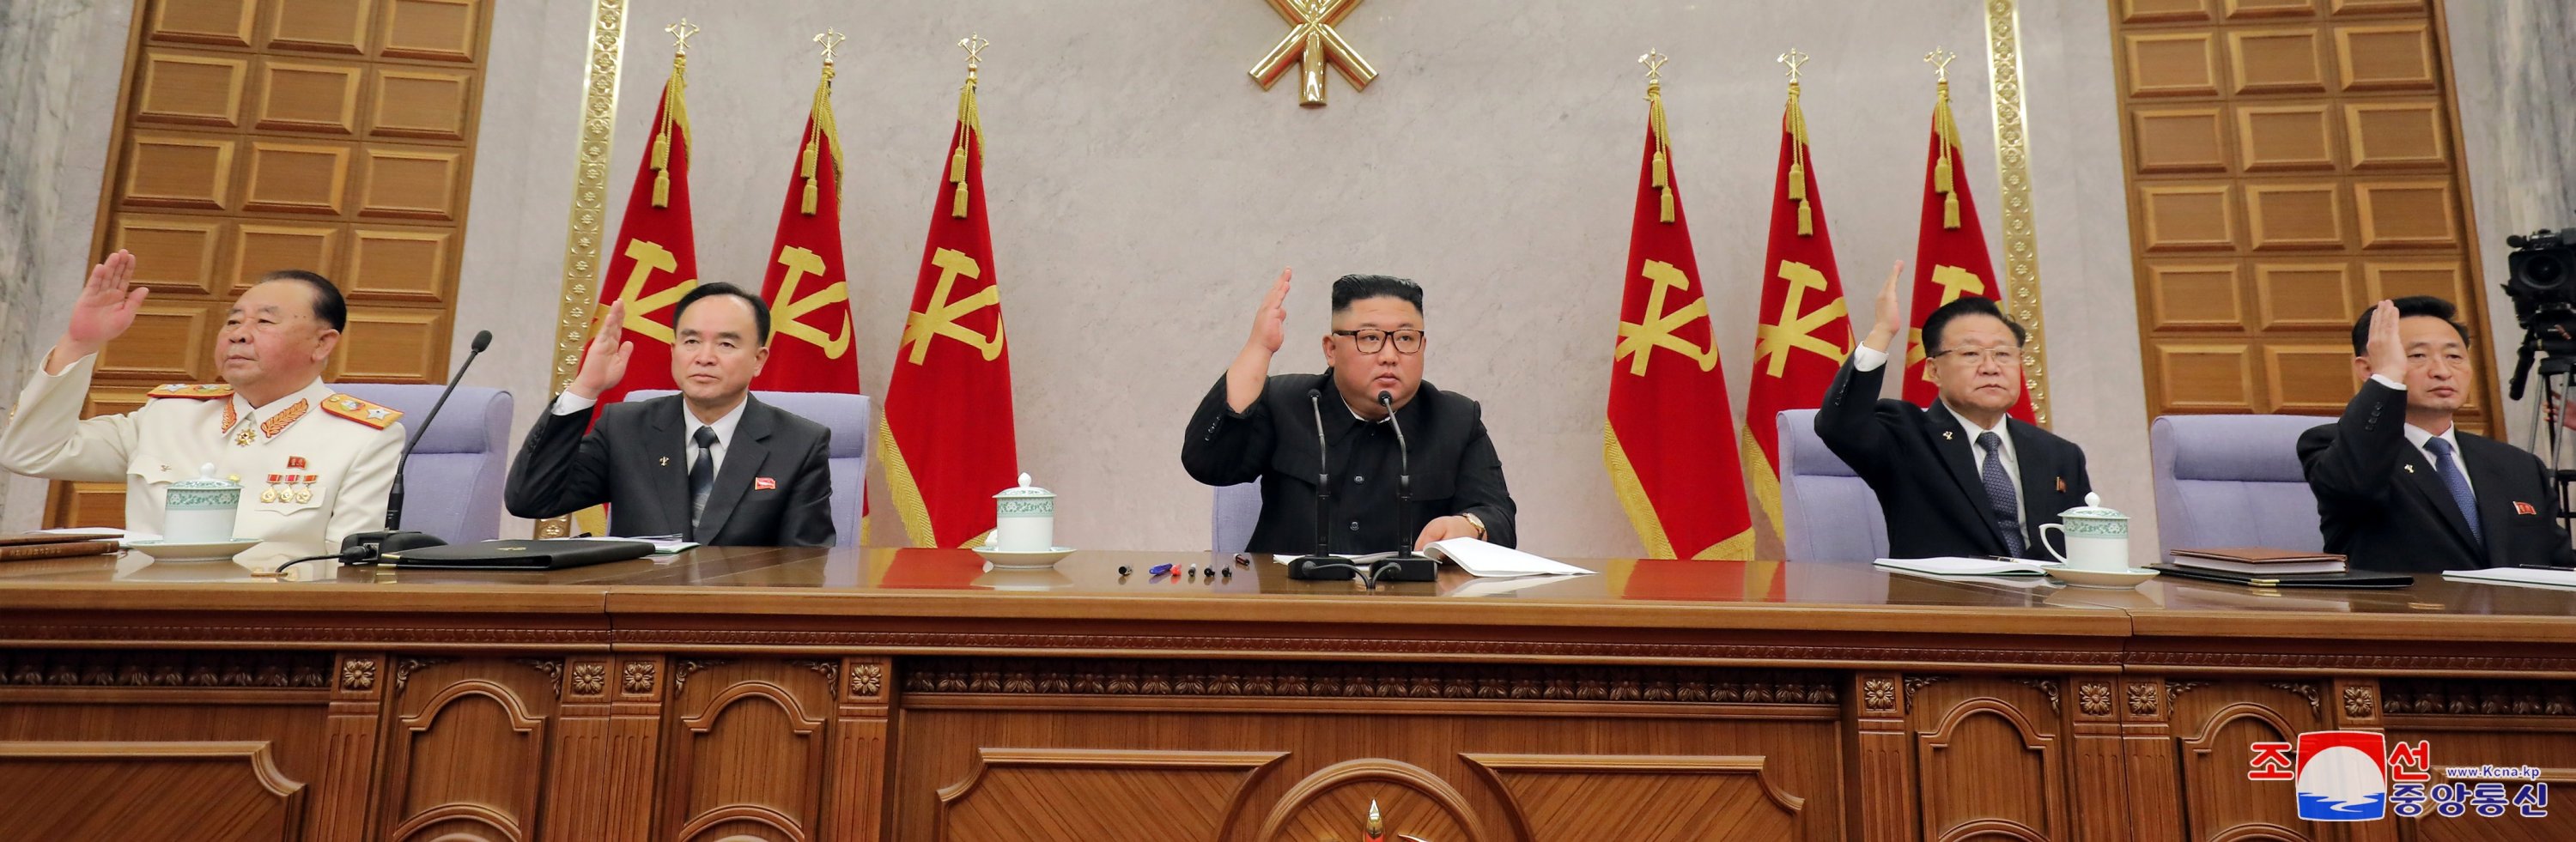 North Korean leader Kim Jong Un attends a plenary meeting of the Workers' Party in Pyongyang, North Korea, in this undated photo released by North Korea's Korean Central News Agency on Feb. 12, 2021. (KCNA via Reuters)